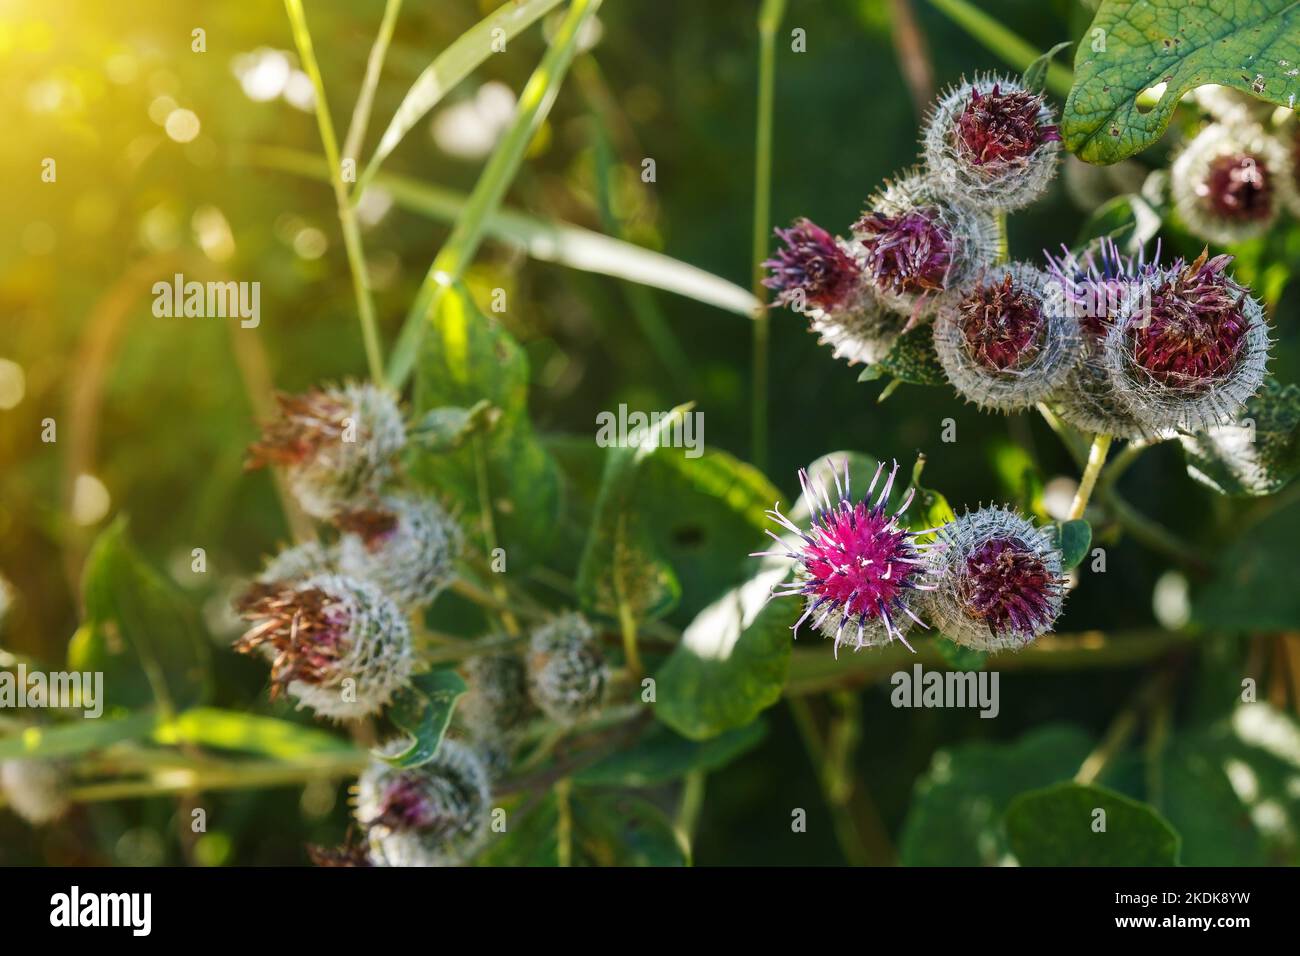 Arctium lappa commonly called greater burdock. Blooming burdock flowers on natural plant background Stock Photo